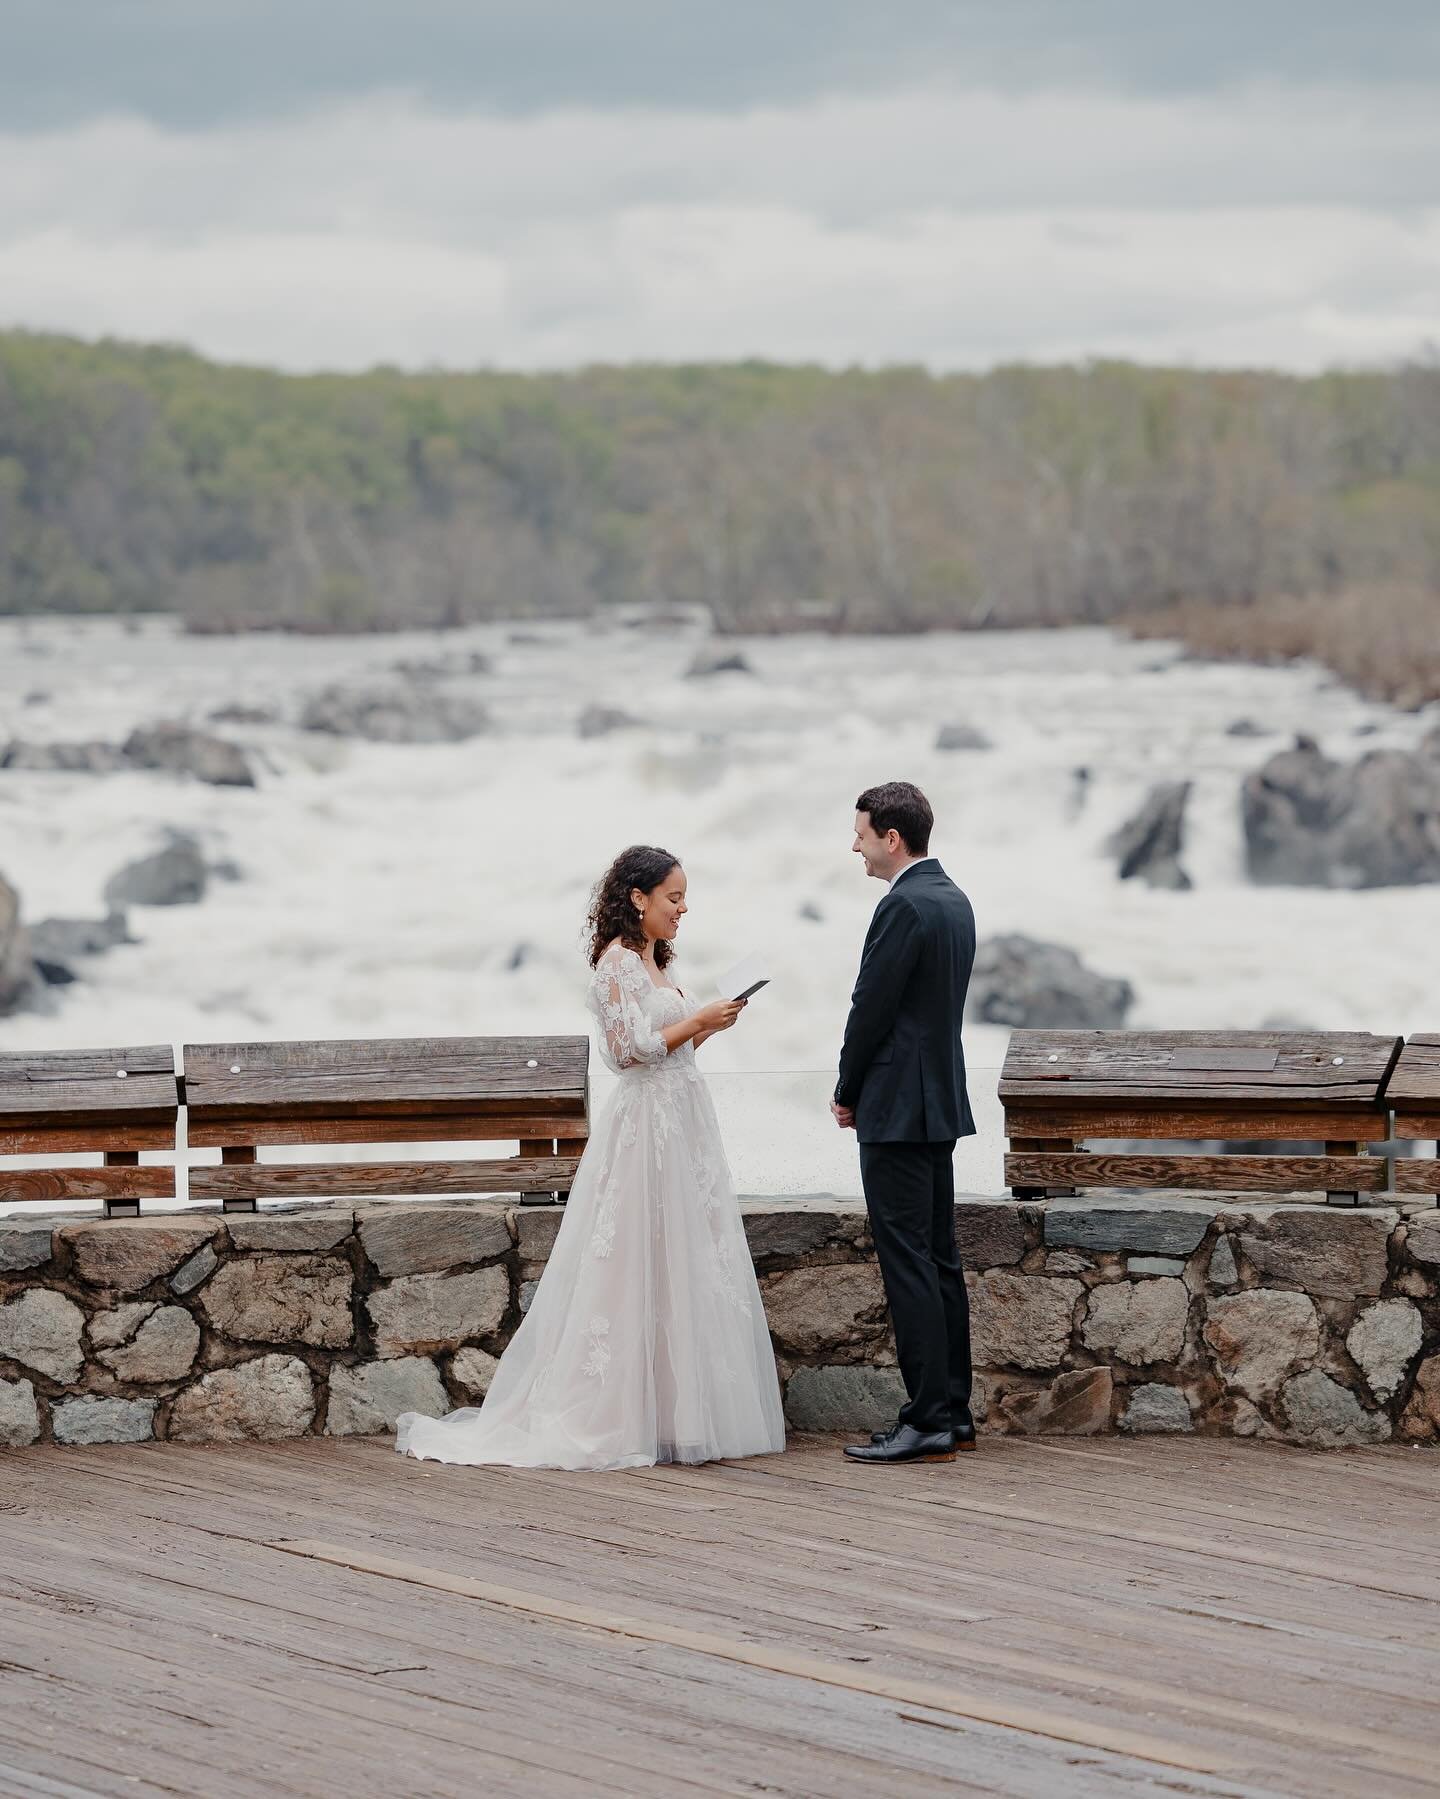 I had the honor of capturing the magic of love amidst the breathtaking scenery of Great Falls Park, witnessing this beautiful couple exchange their vows was a privilege beyond words. 🤎📸

As we commemorate Earth Day today, I&rsquo;m reminded of the 